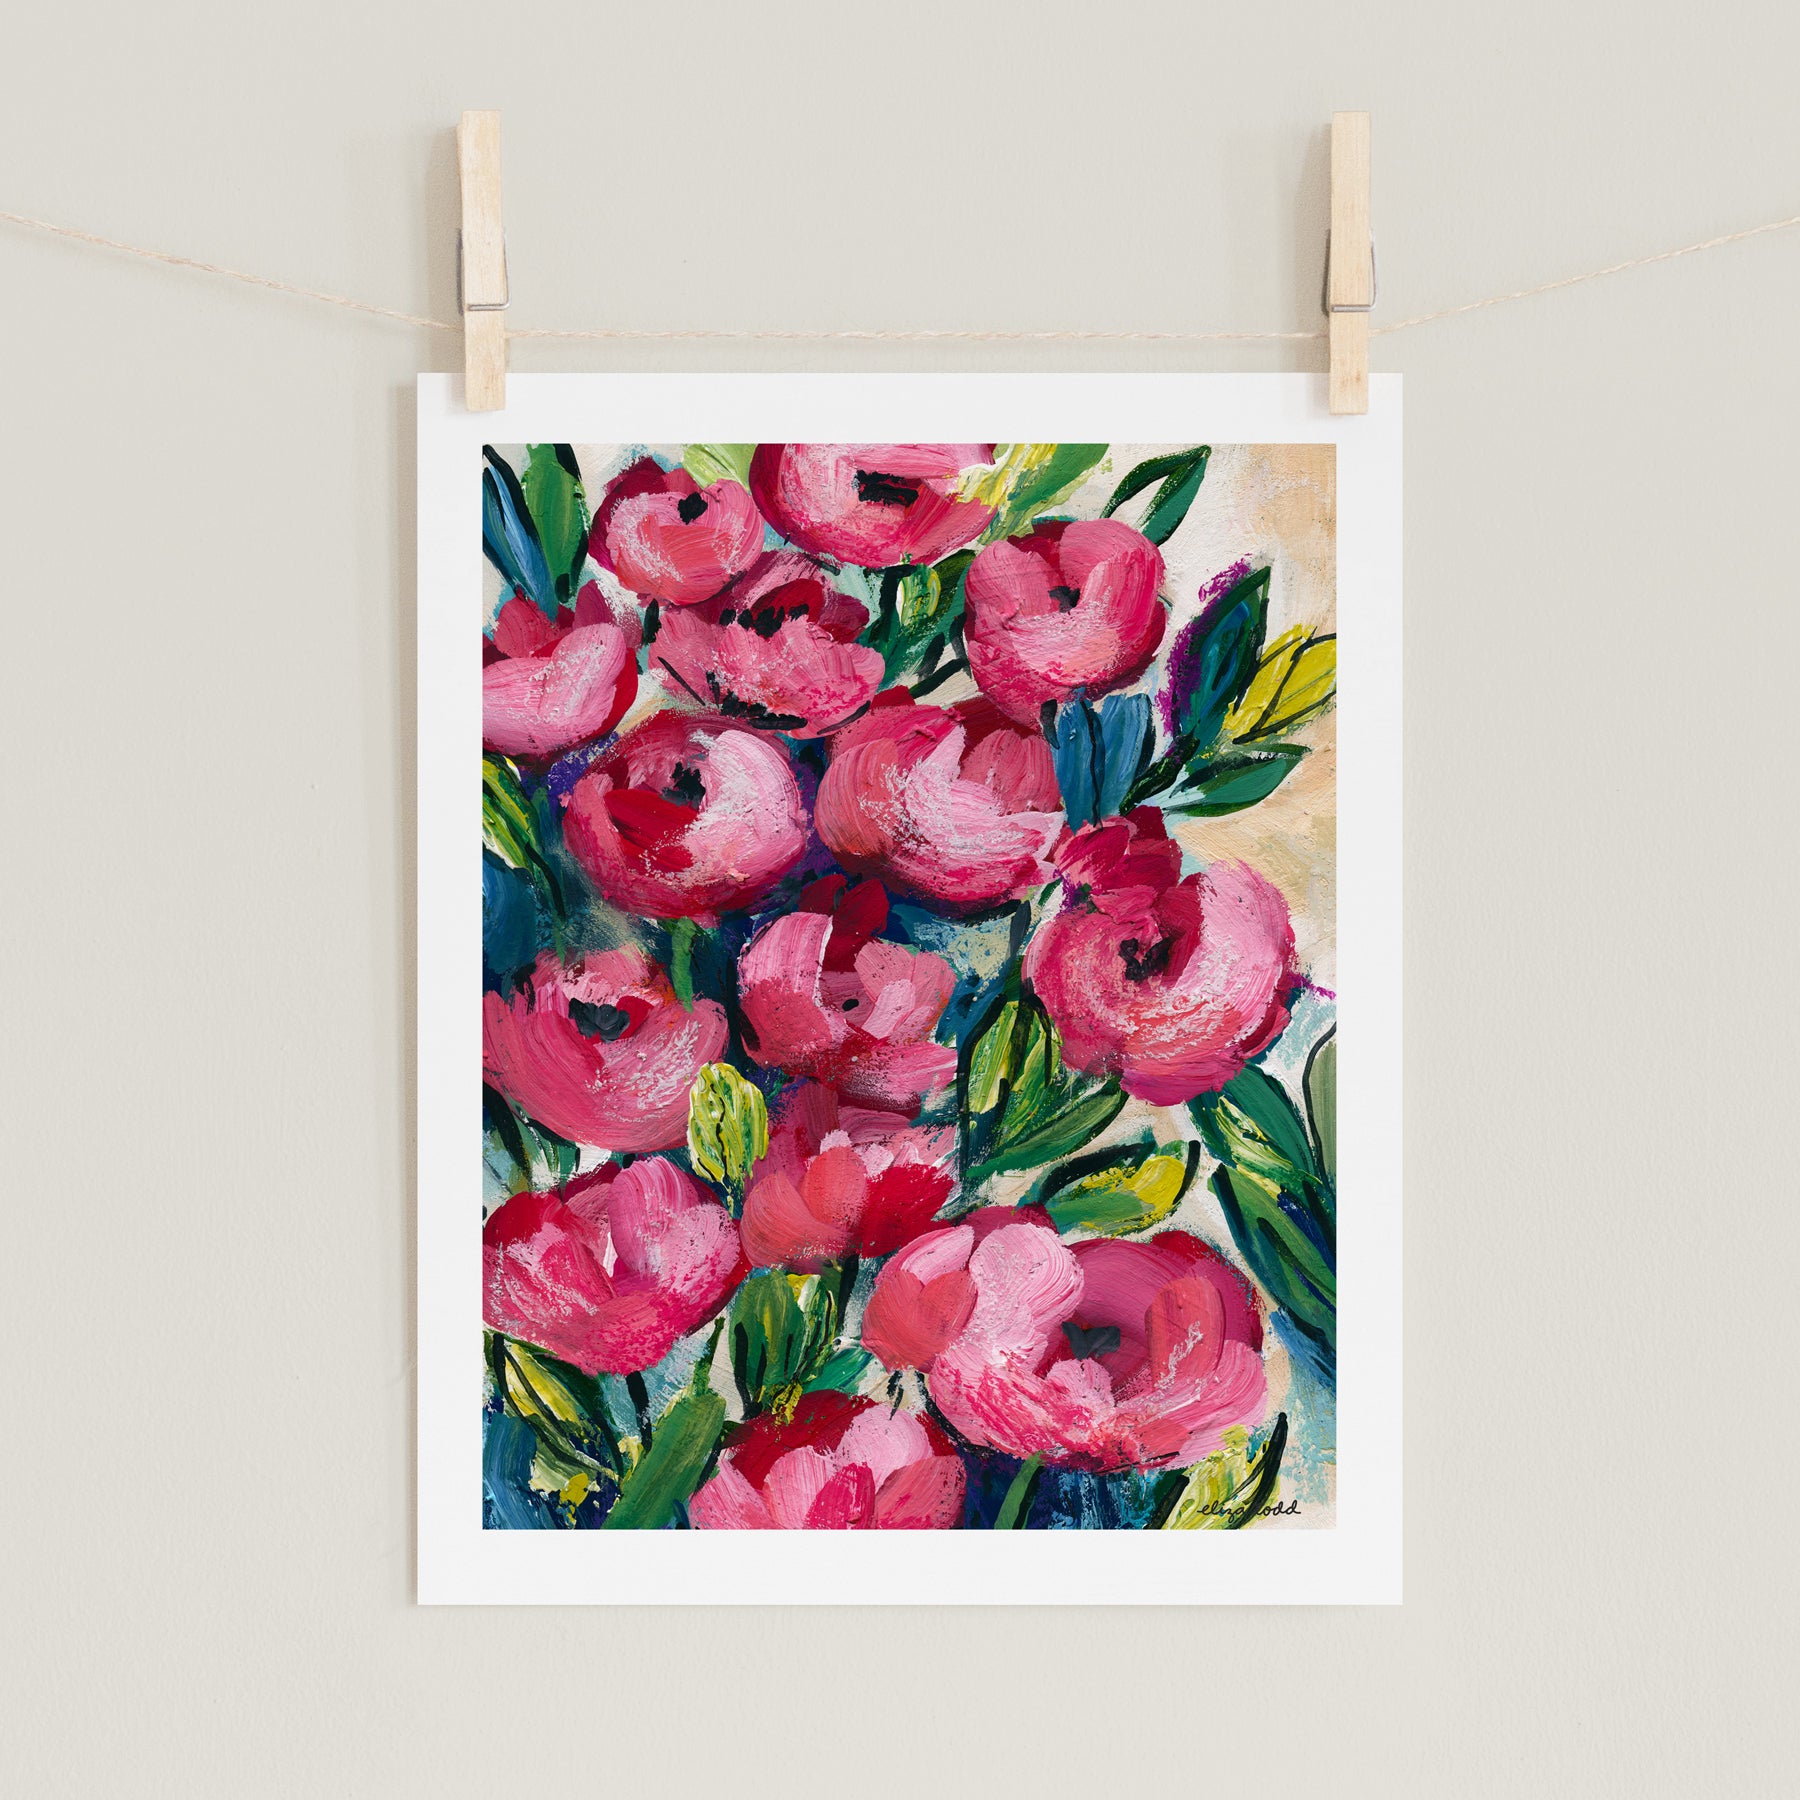 Fine art prints by Eliza Todd featuring roses with strong bright pinks and greens - APeaceofWerk.com